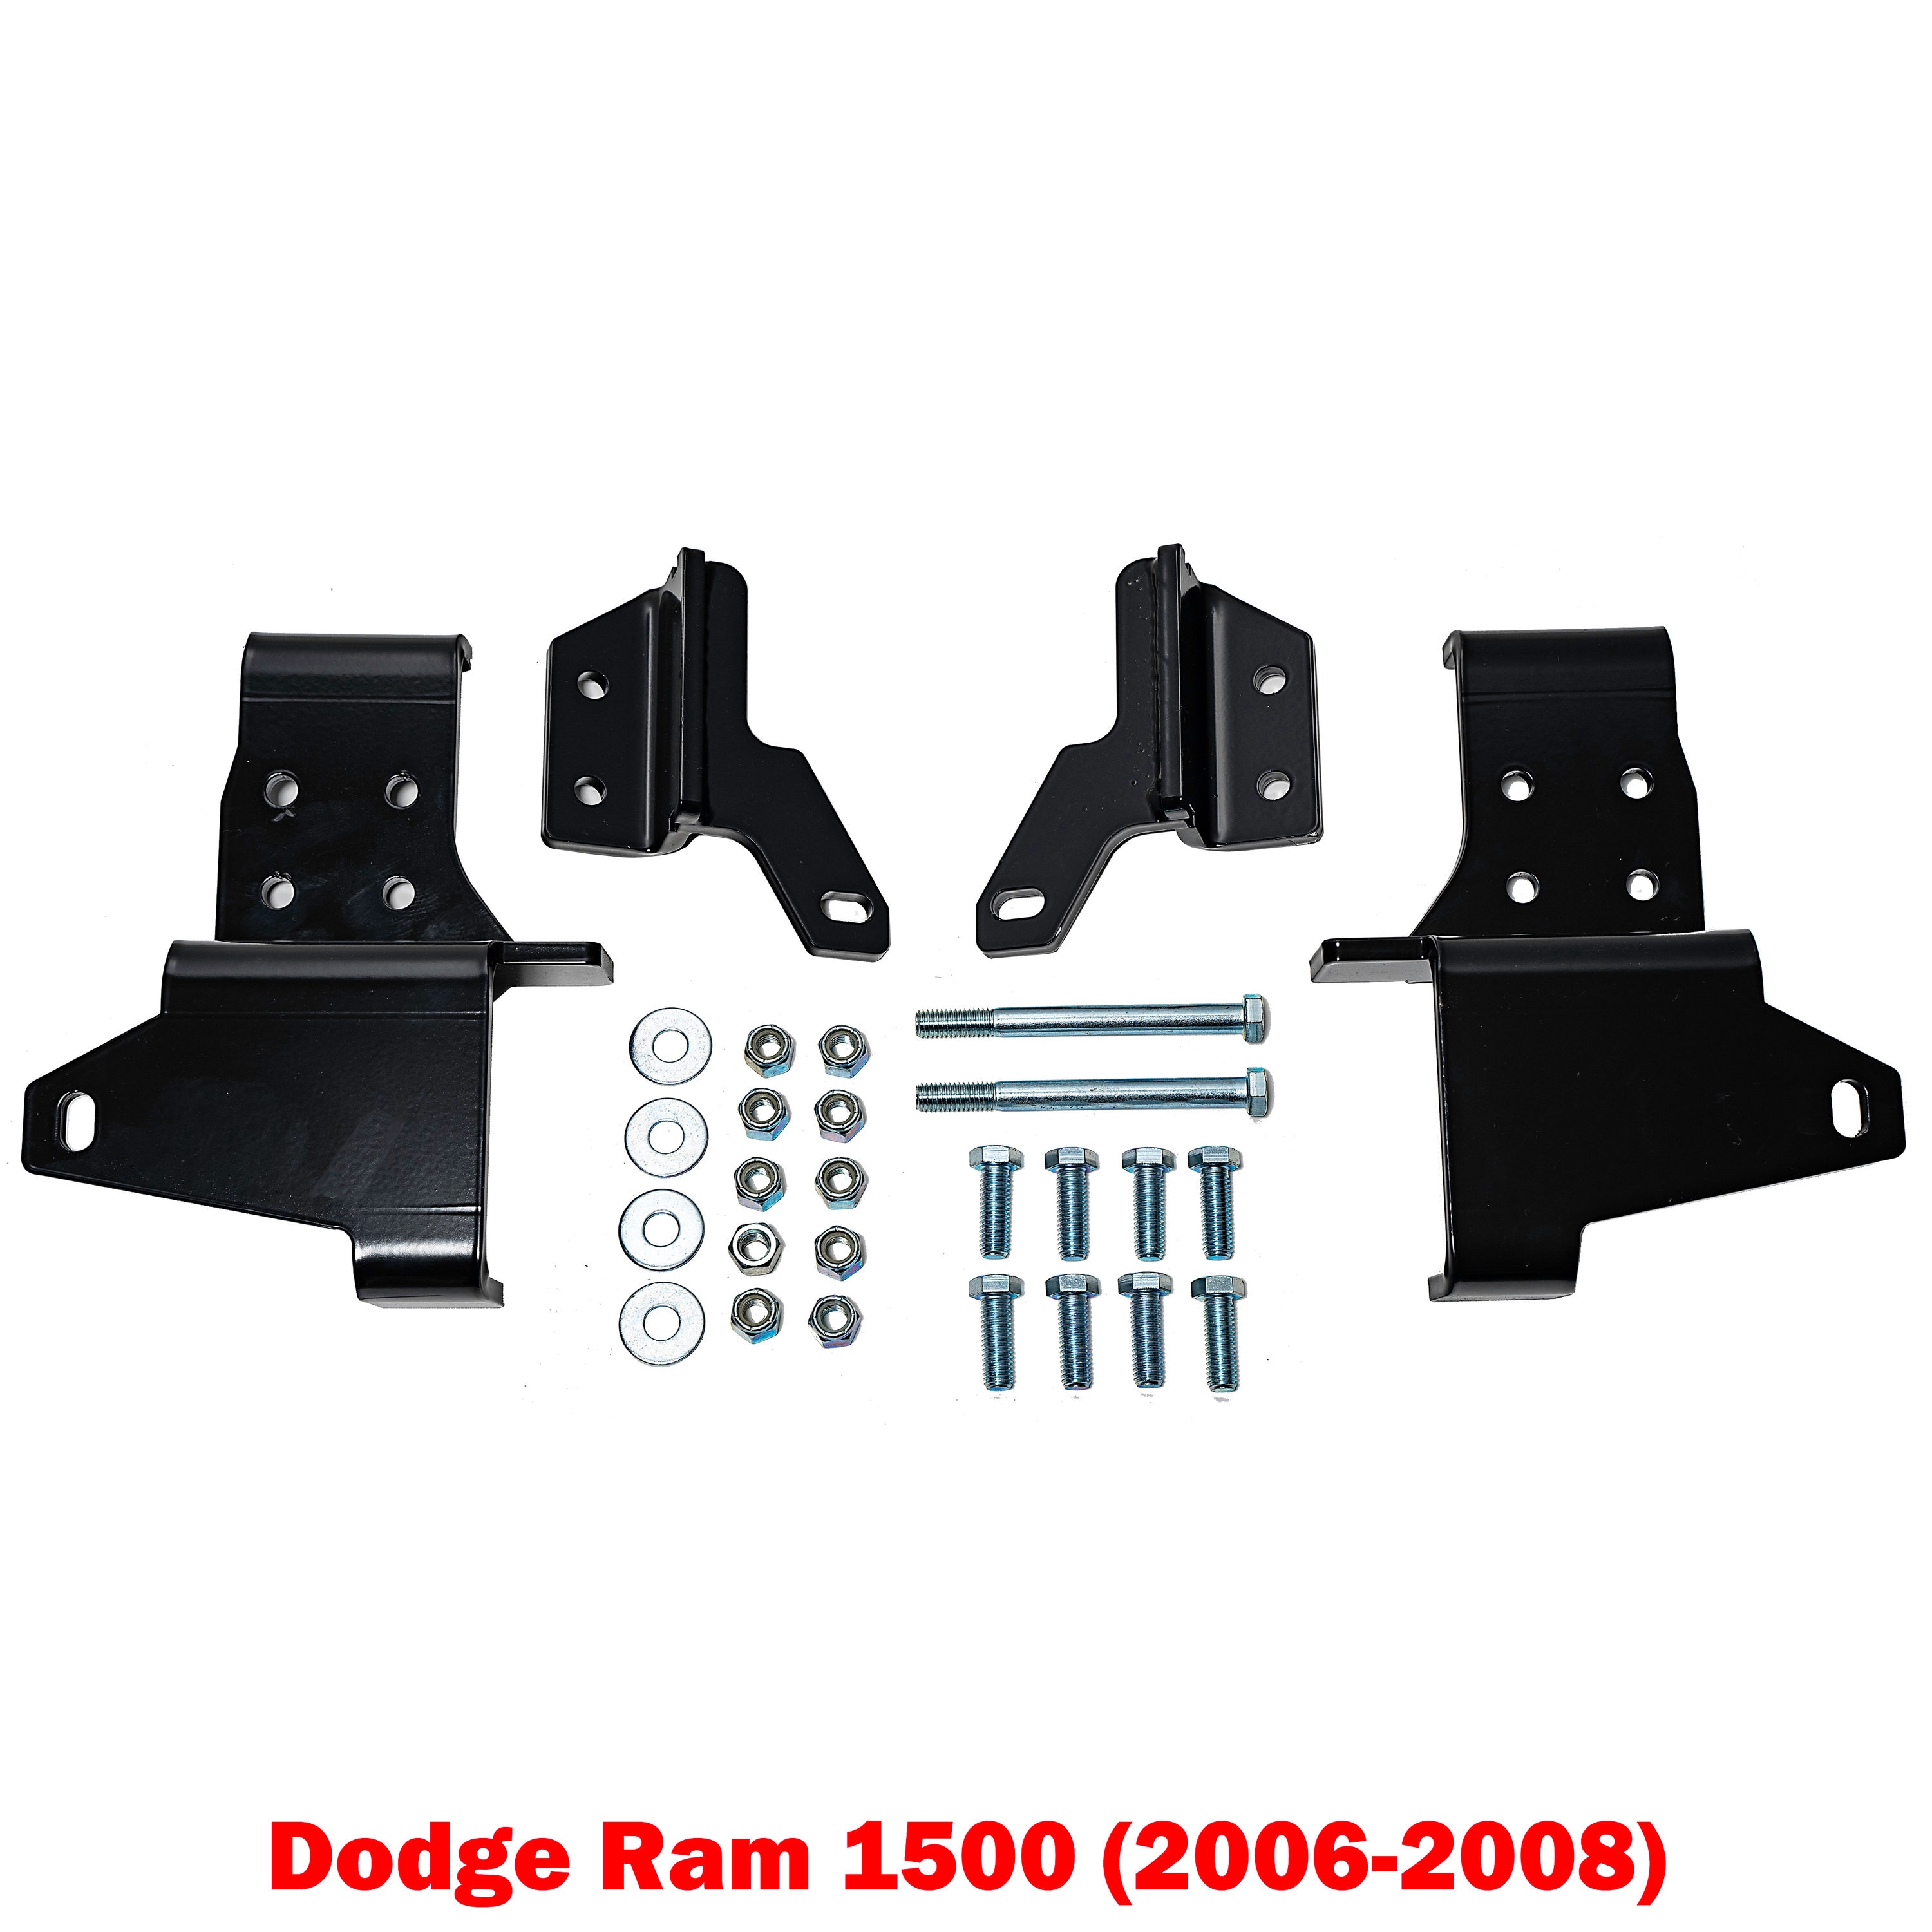 Detail K2 Mount Kit Snow Plow Accessory Compatible with Dodge Ram 1500 2006-2008 | 84313